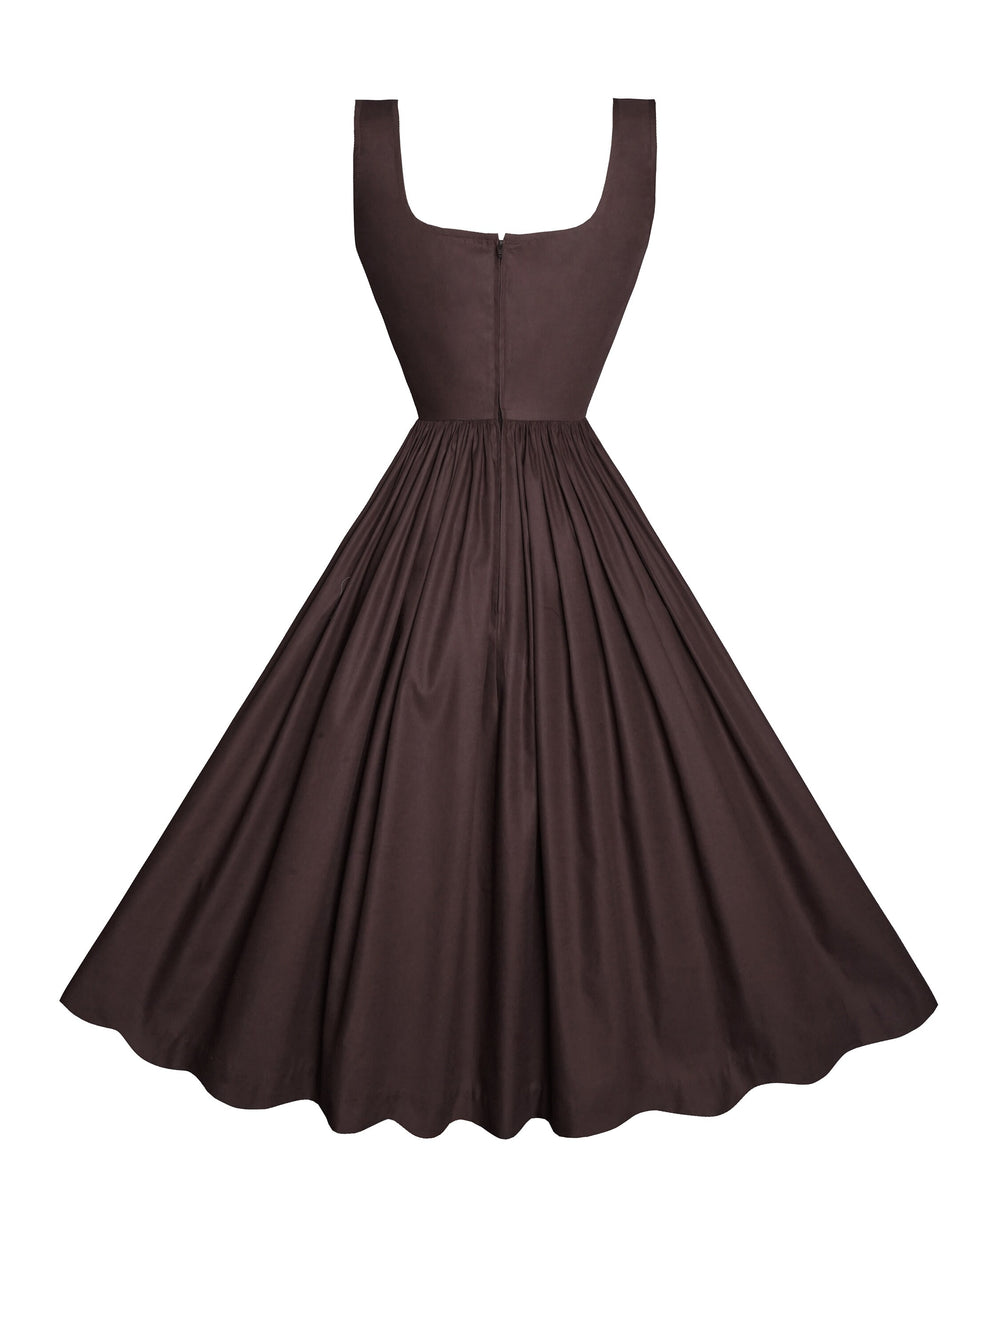 MTO - Michelle Dress in Hickory Brown Cotton